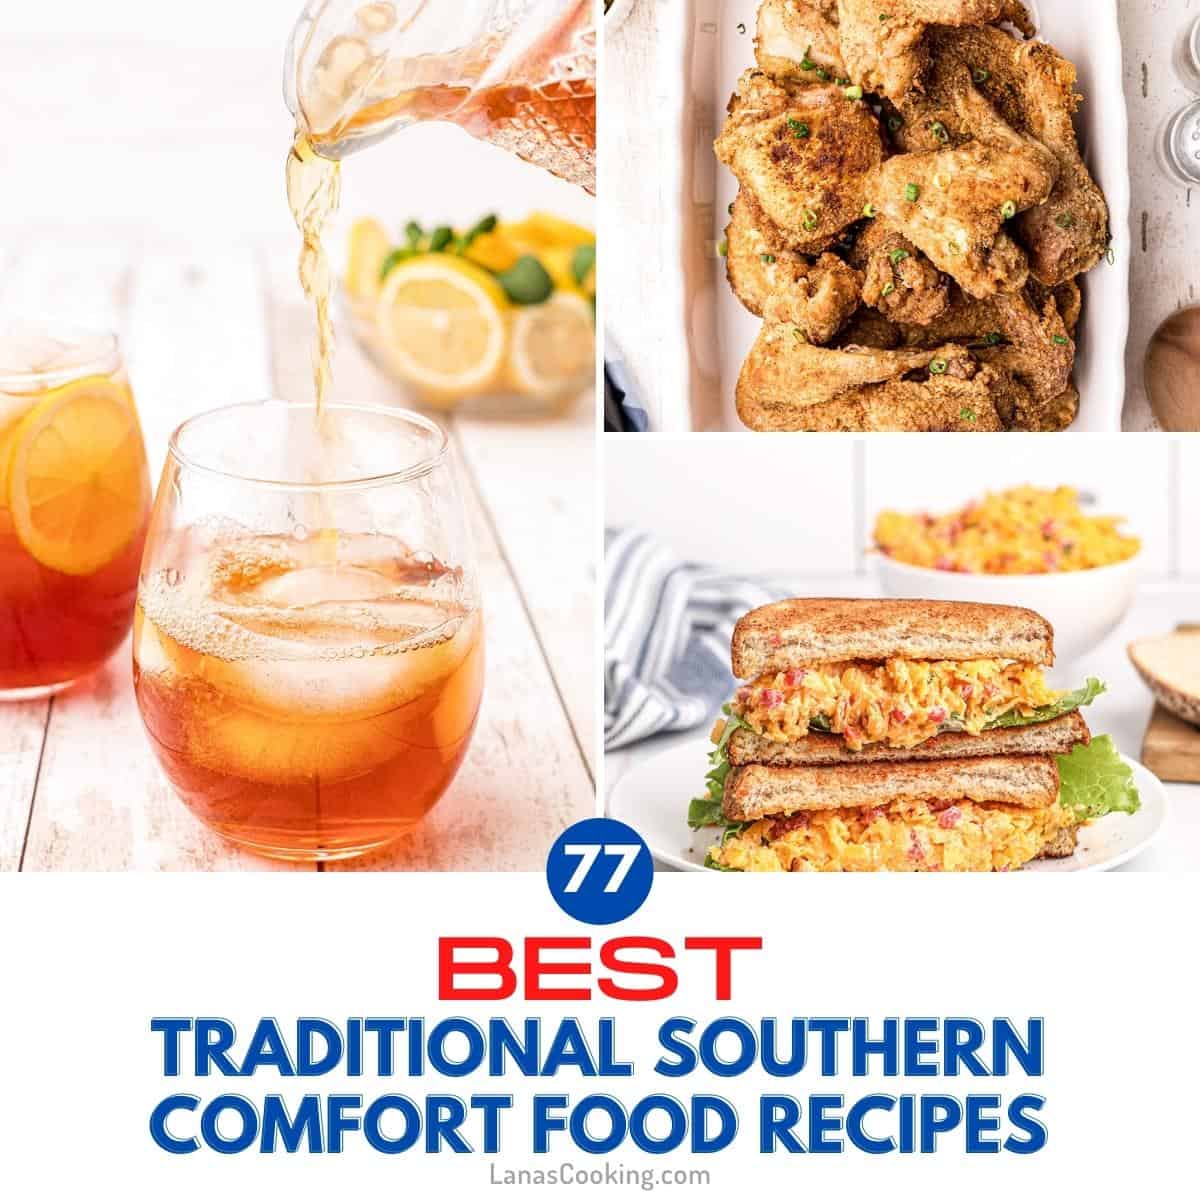 78 Best Traditional Southern Comfort Food Recipes